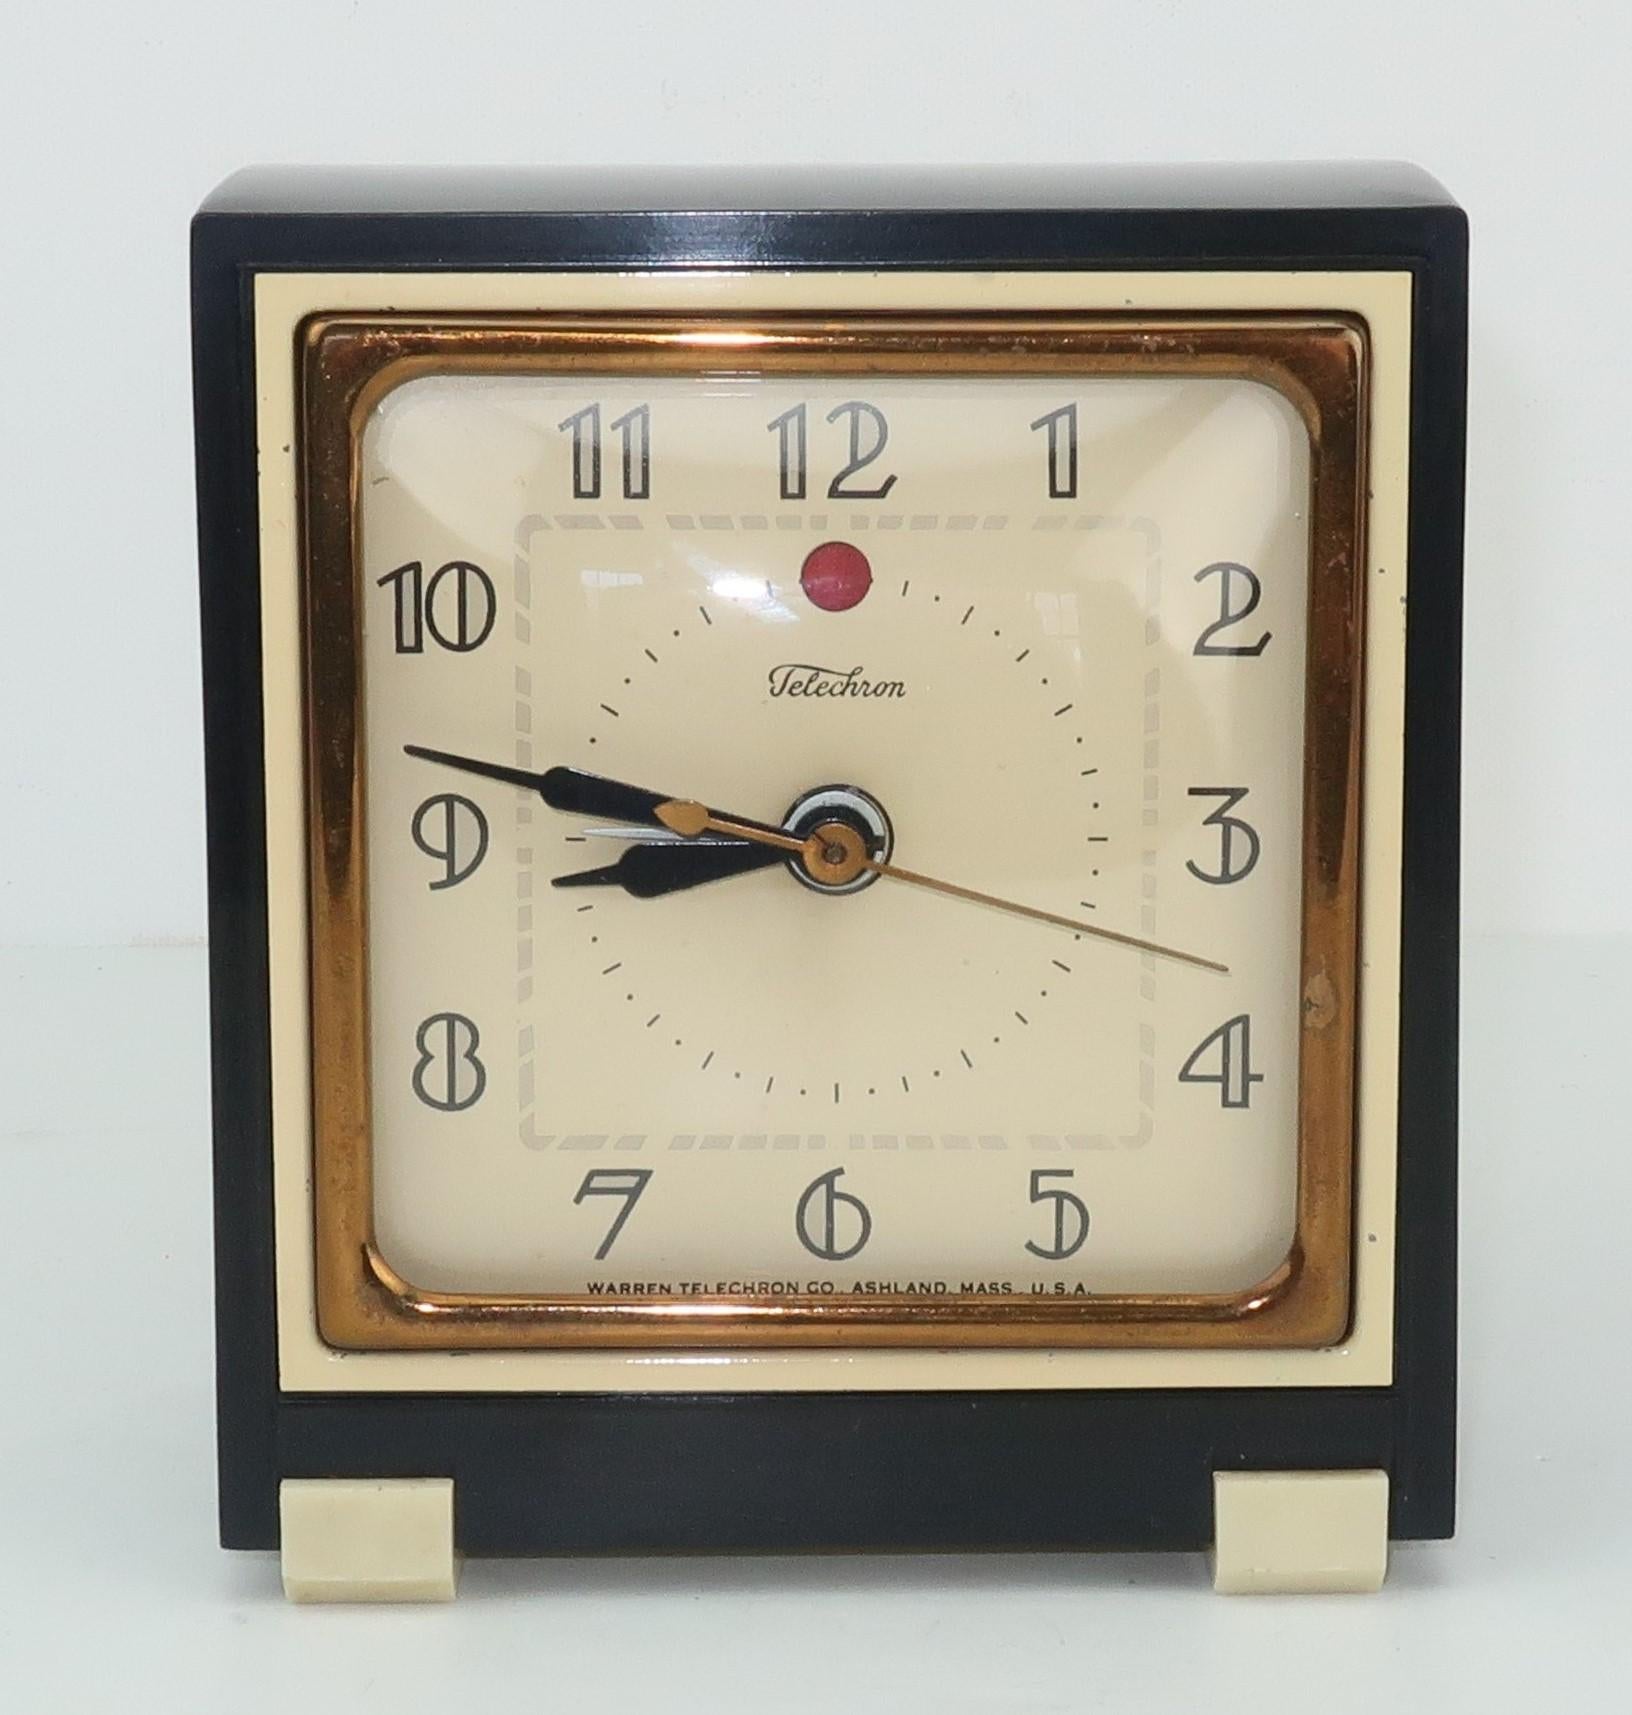 If Coco Chanel designed a clock then this art deco cutie, with its crisp black and white style, would be the result. Instead, all the credit goes to Telechron, an American company specializing in stylish and functional electric clocks considered to